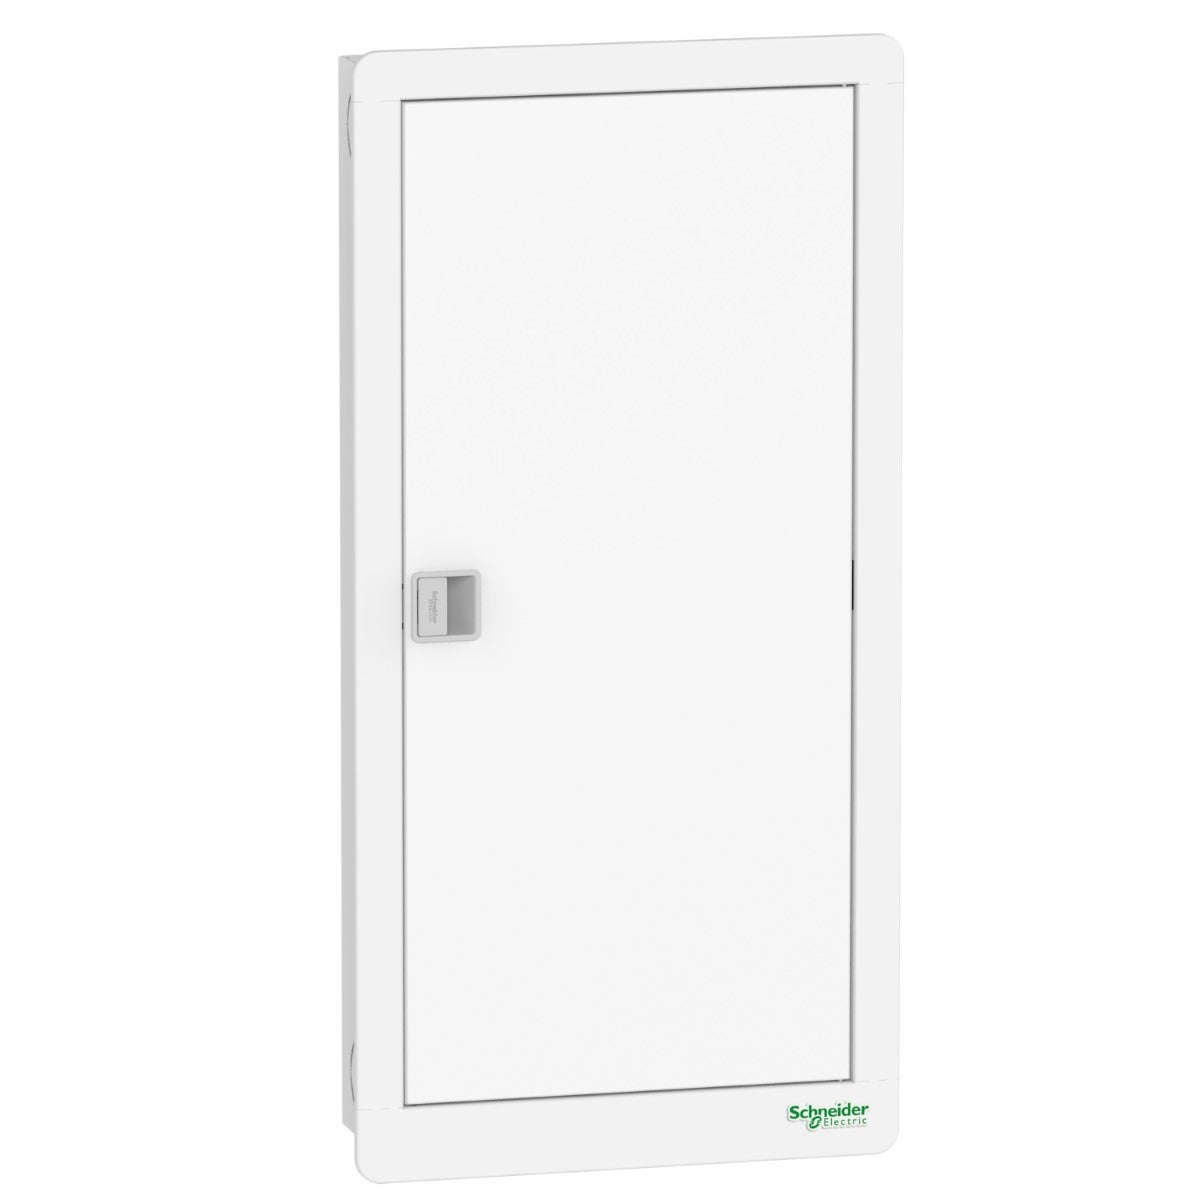 Vertical TPN distribution board, Acti9 Disbo, 36 way, 100A, EZC incomer, surface mount